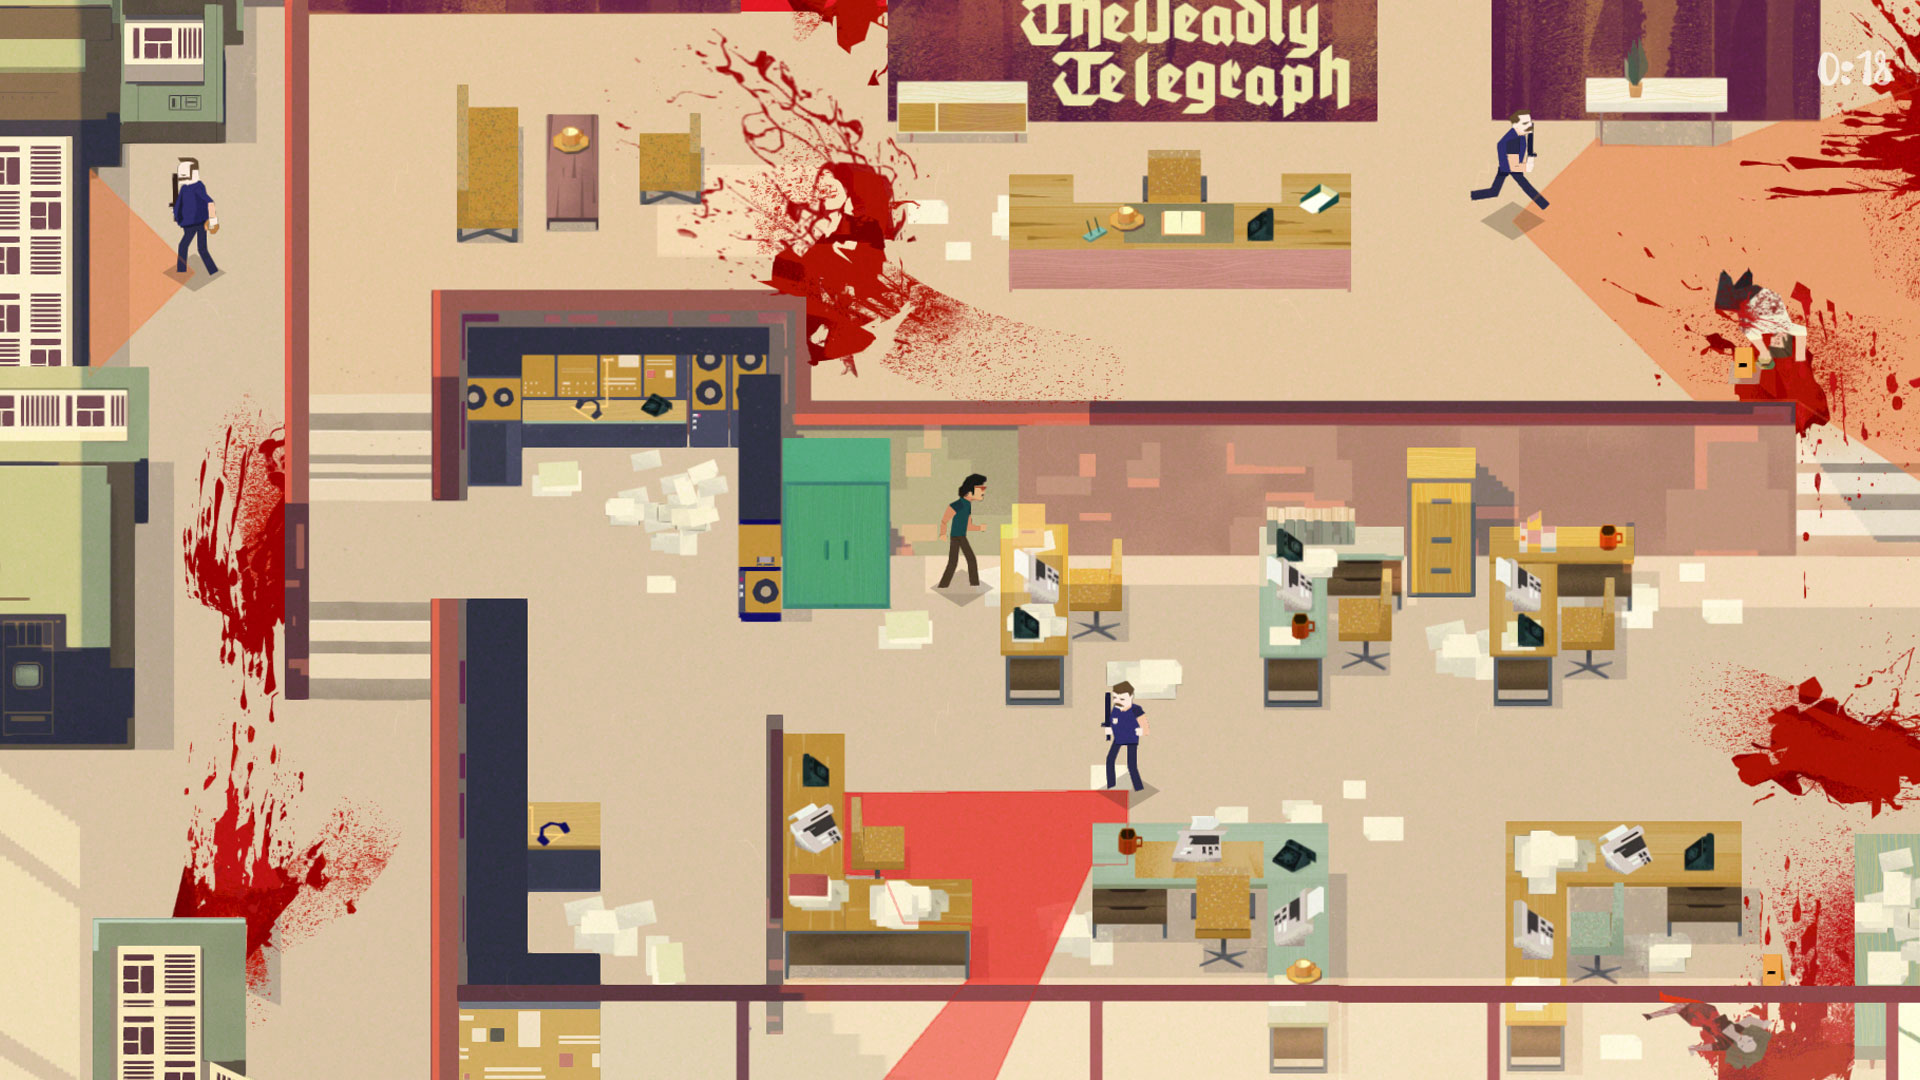 Serial Cleaner Screenshot of cleaning up after murder game